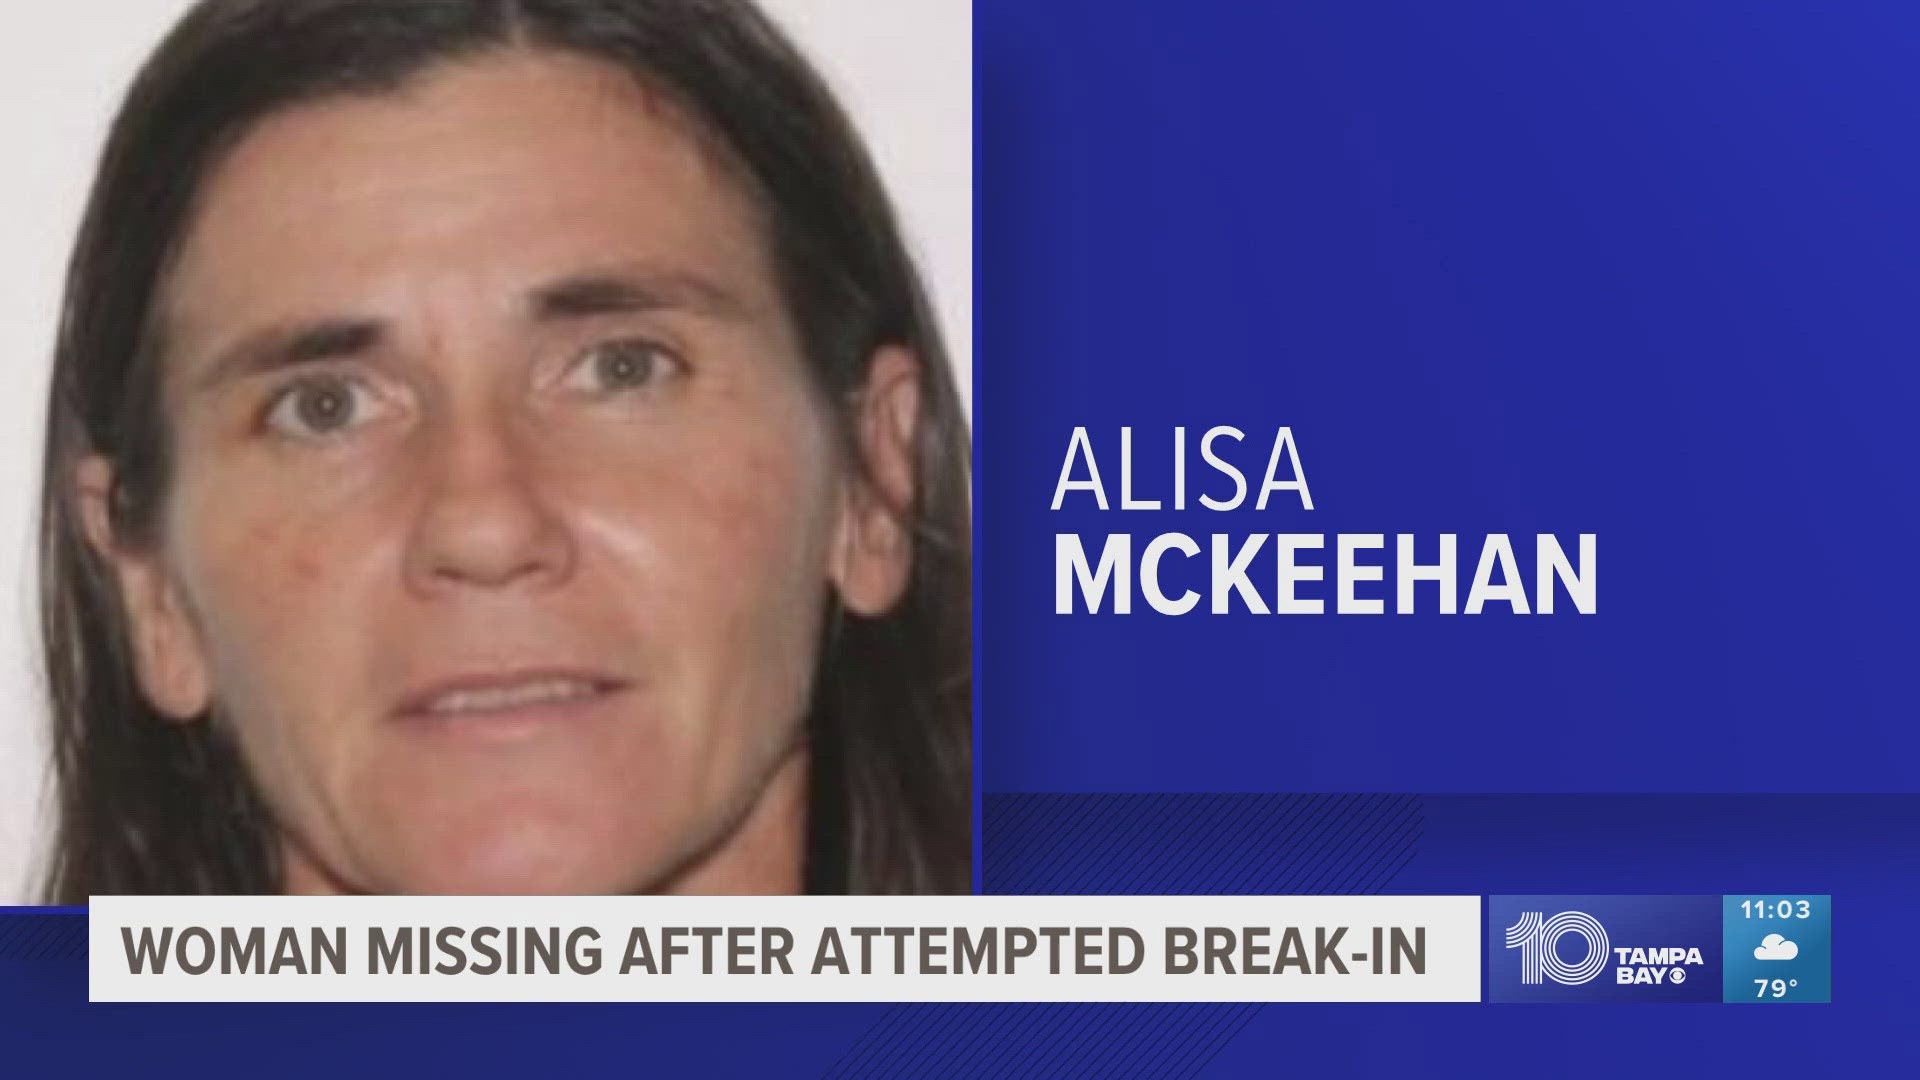 Deputies said two men were trying to break into a Port Richey home when Alisa McKeehan ran off.